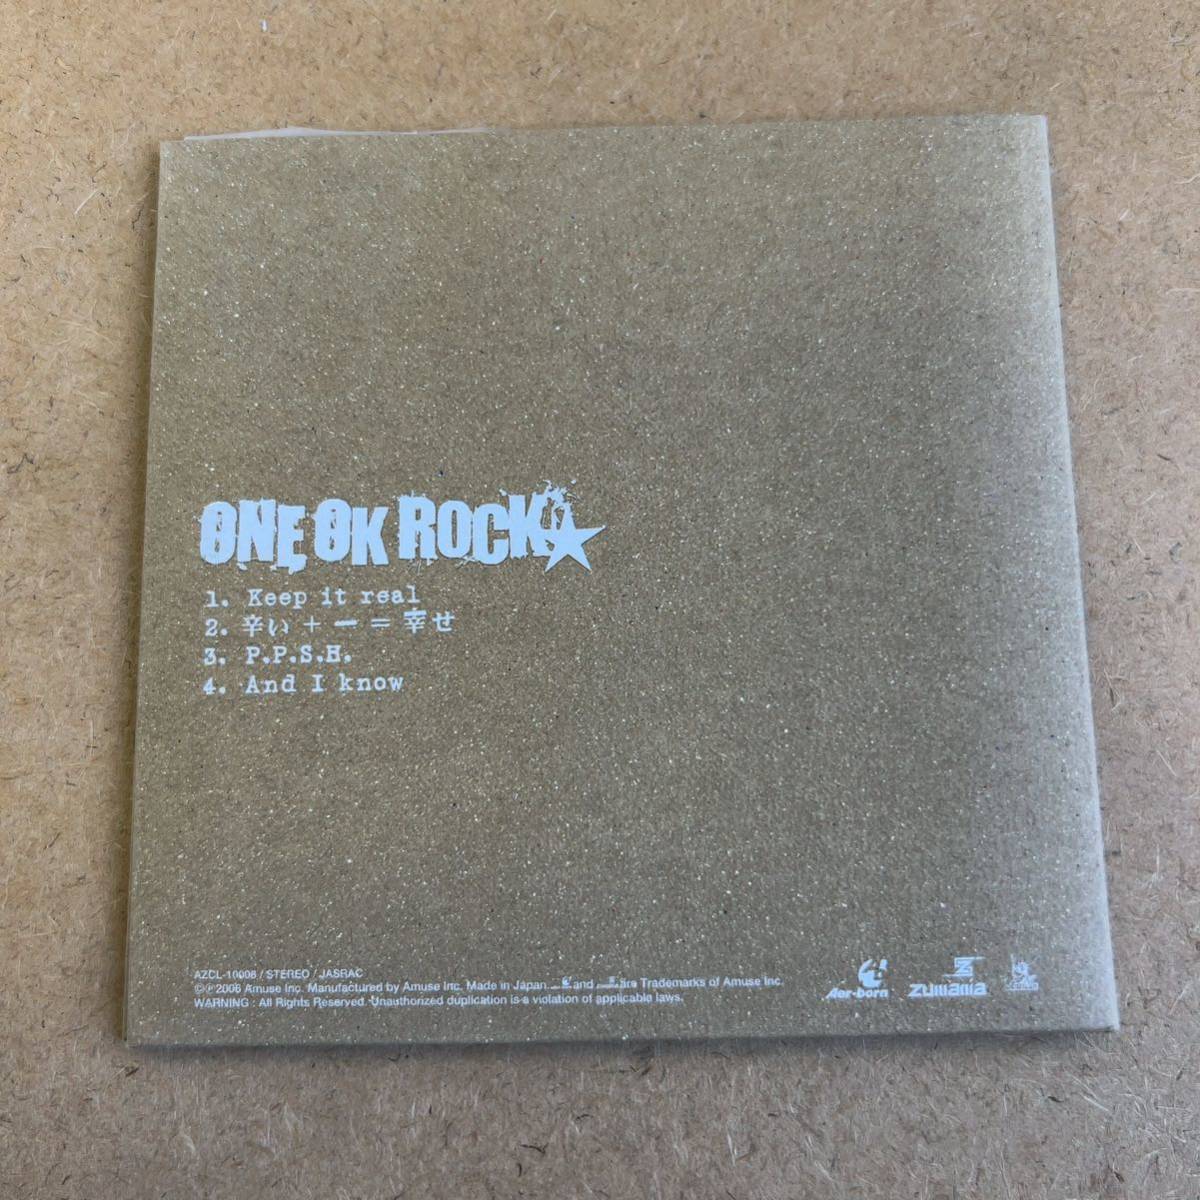  free shipping *ONE OK ROCK[Keep it real] indies record CD* with belt * beautiful goods * one ok * rare record *325